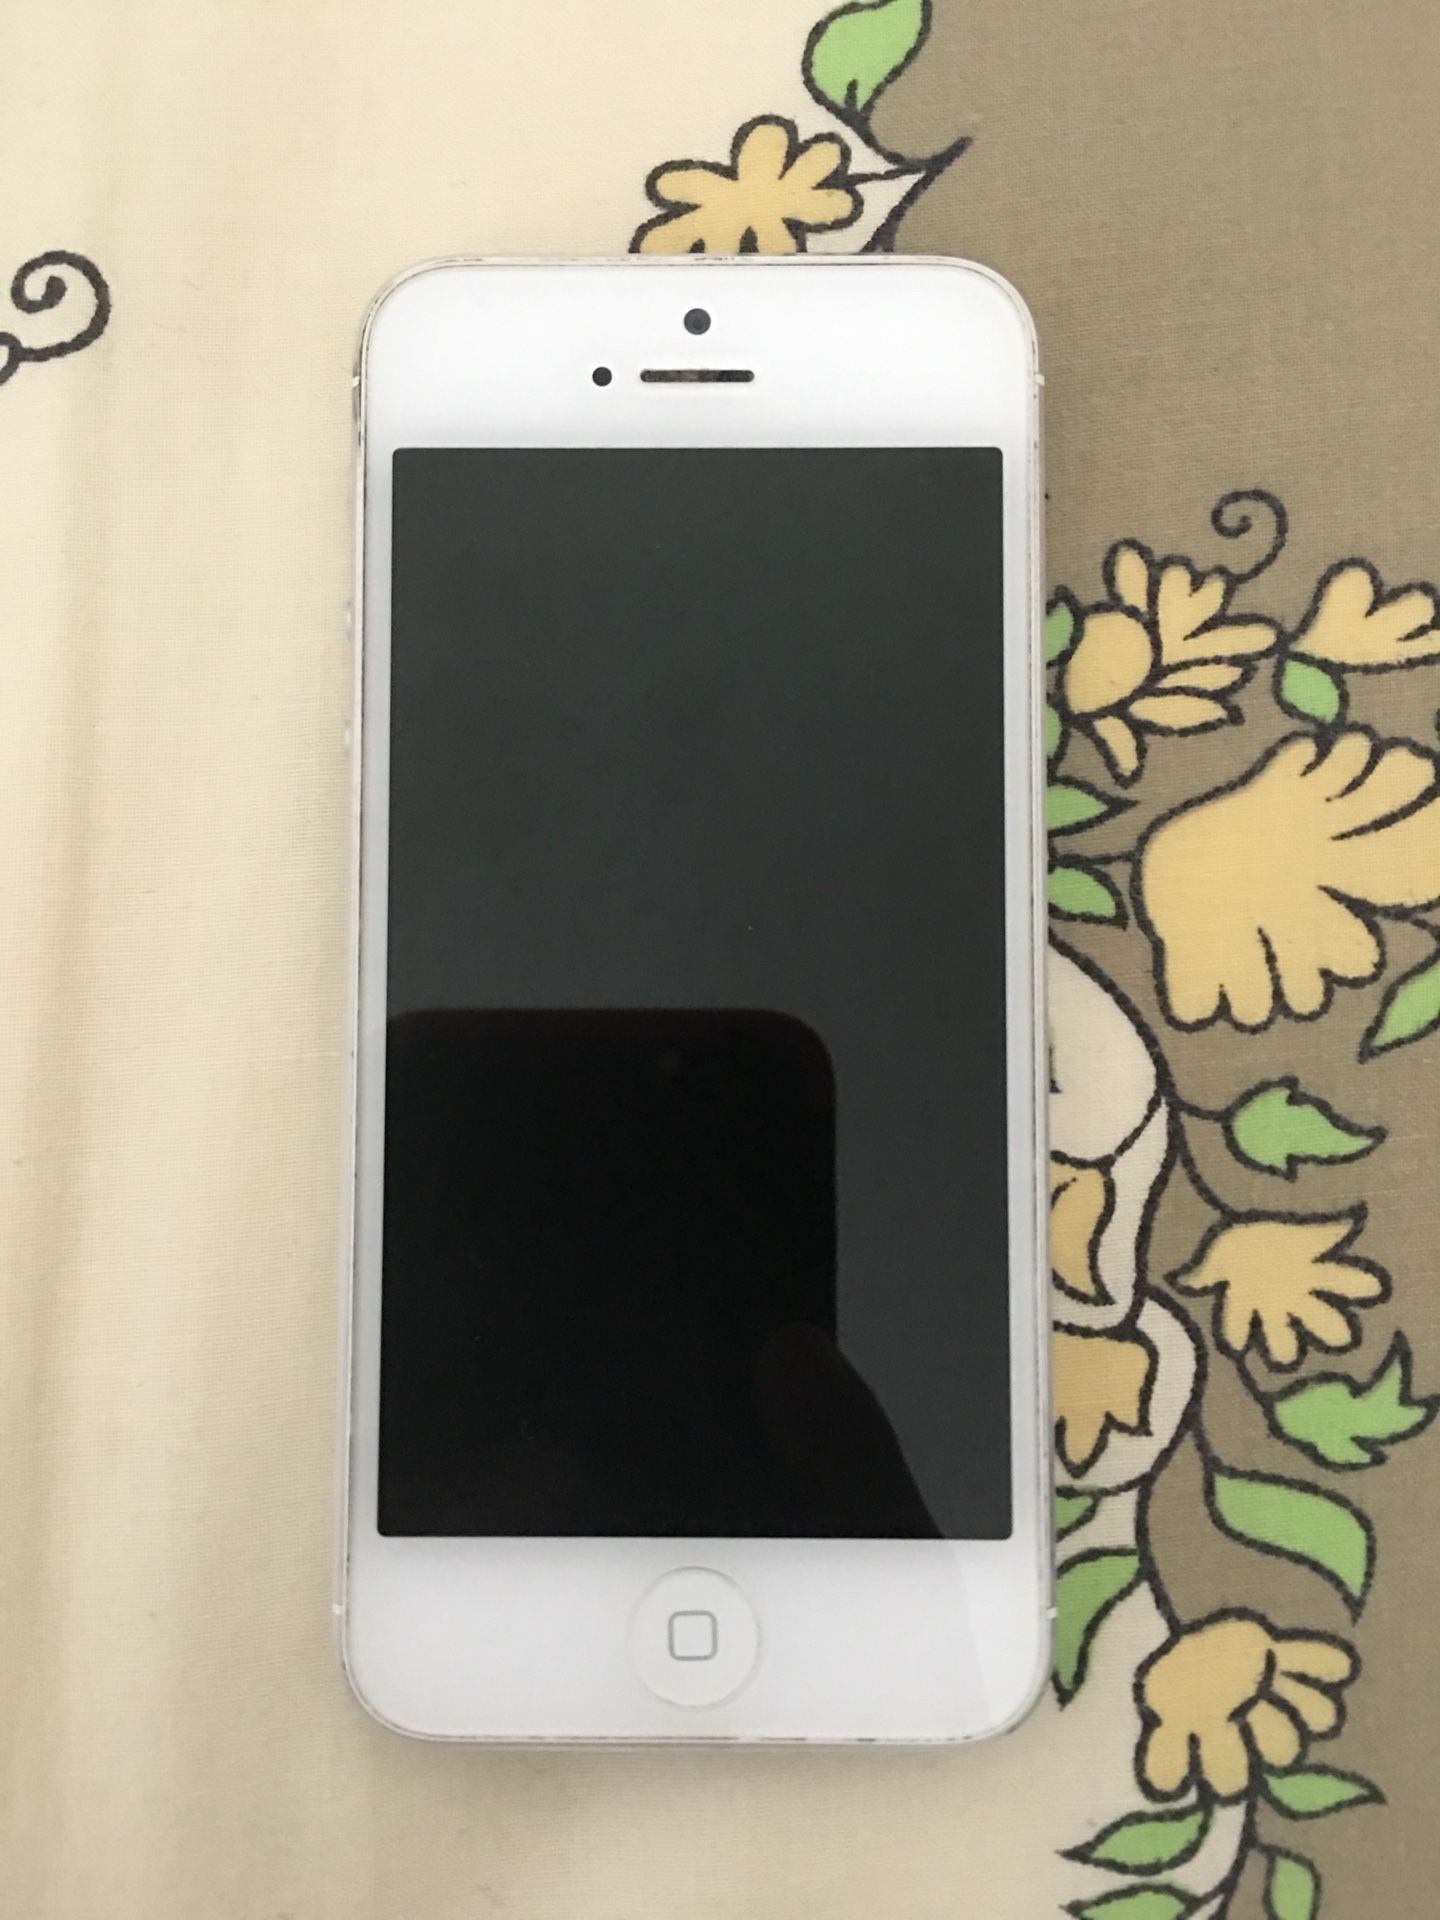 iphone 5 ( disabled connect to itunes )